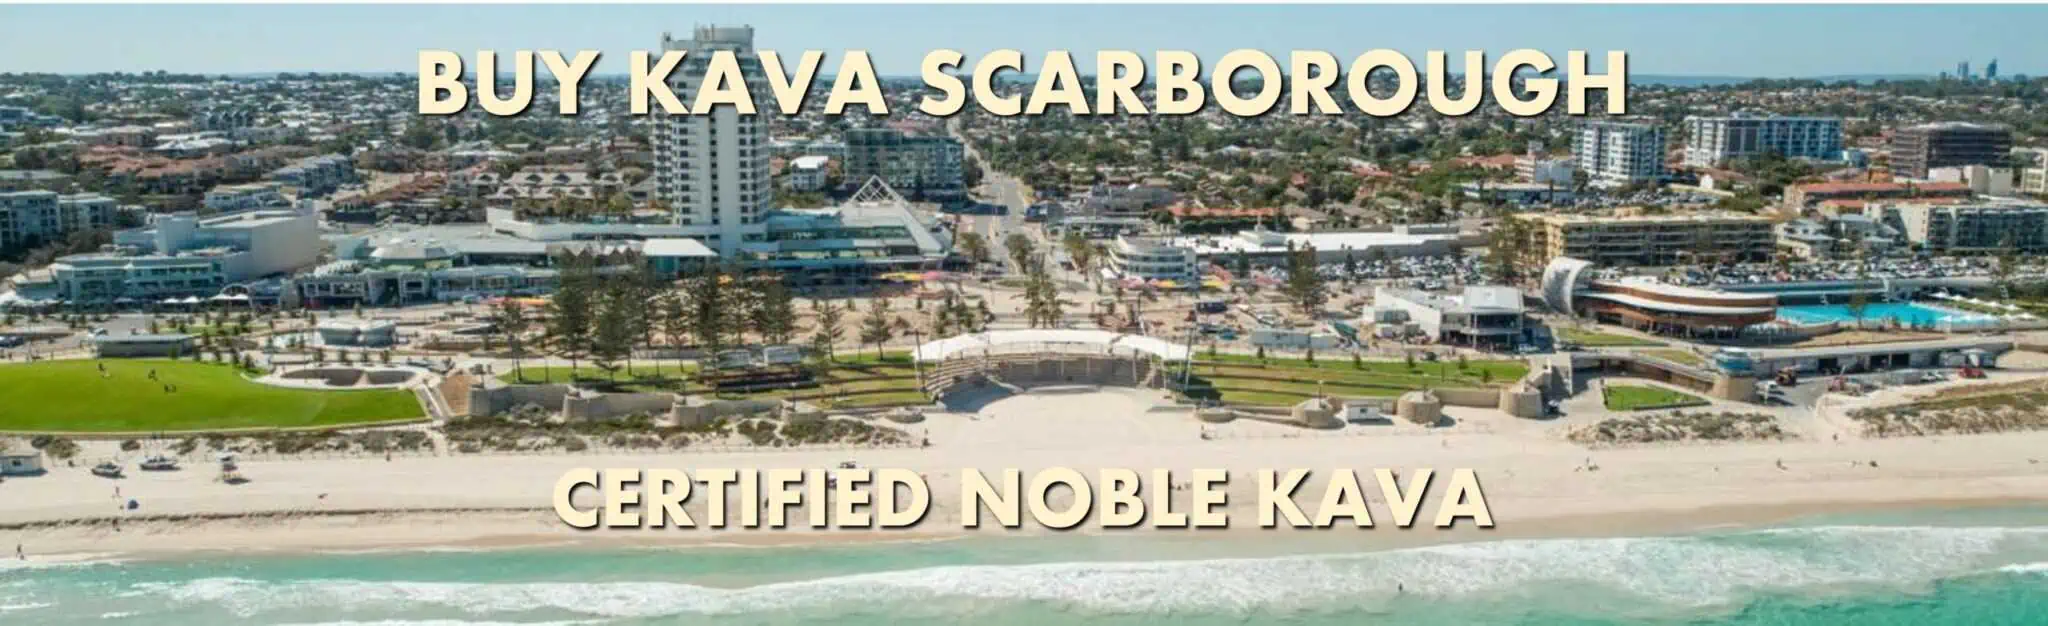 Scarborough Beach in Western Australia with caption Buy Kava Scarborough Certified Noble Kava